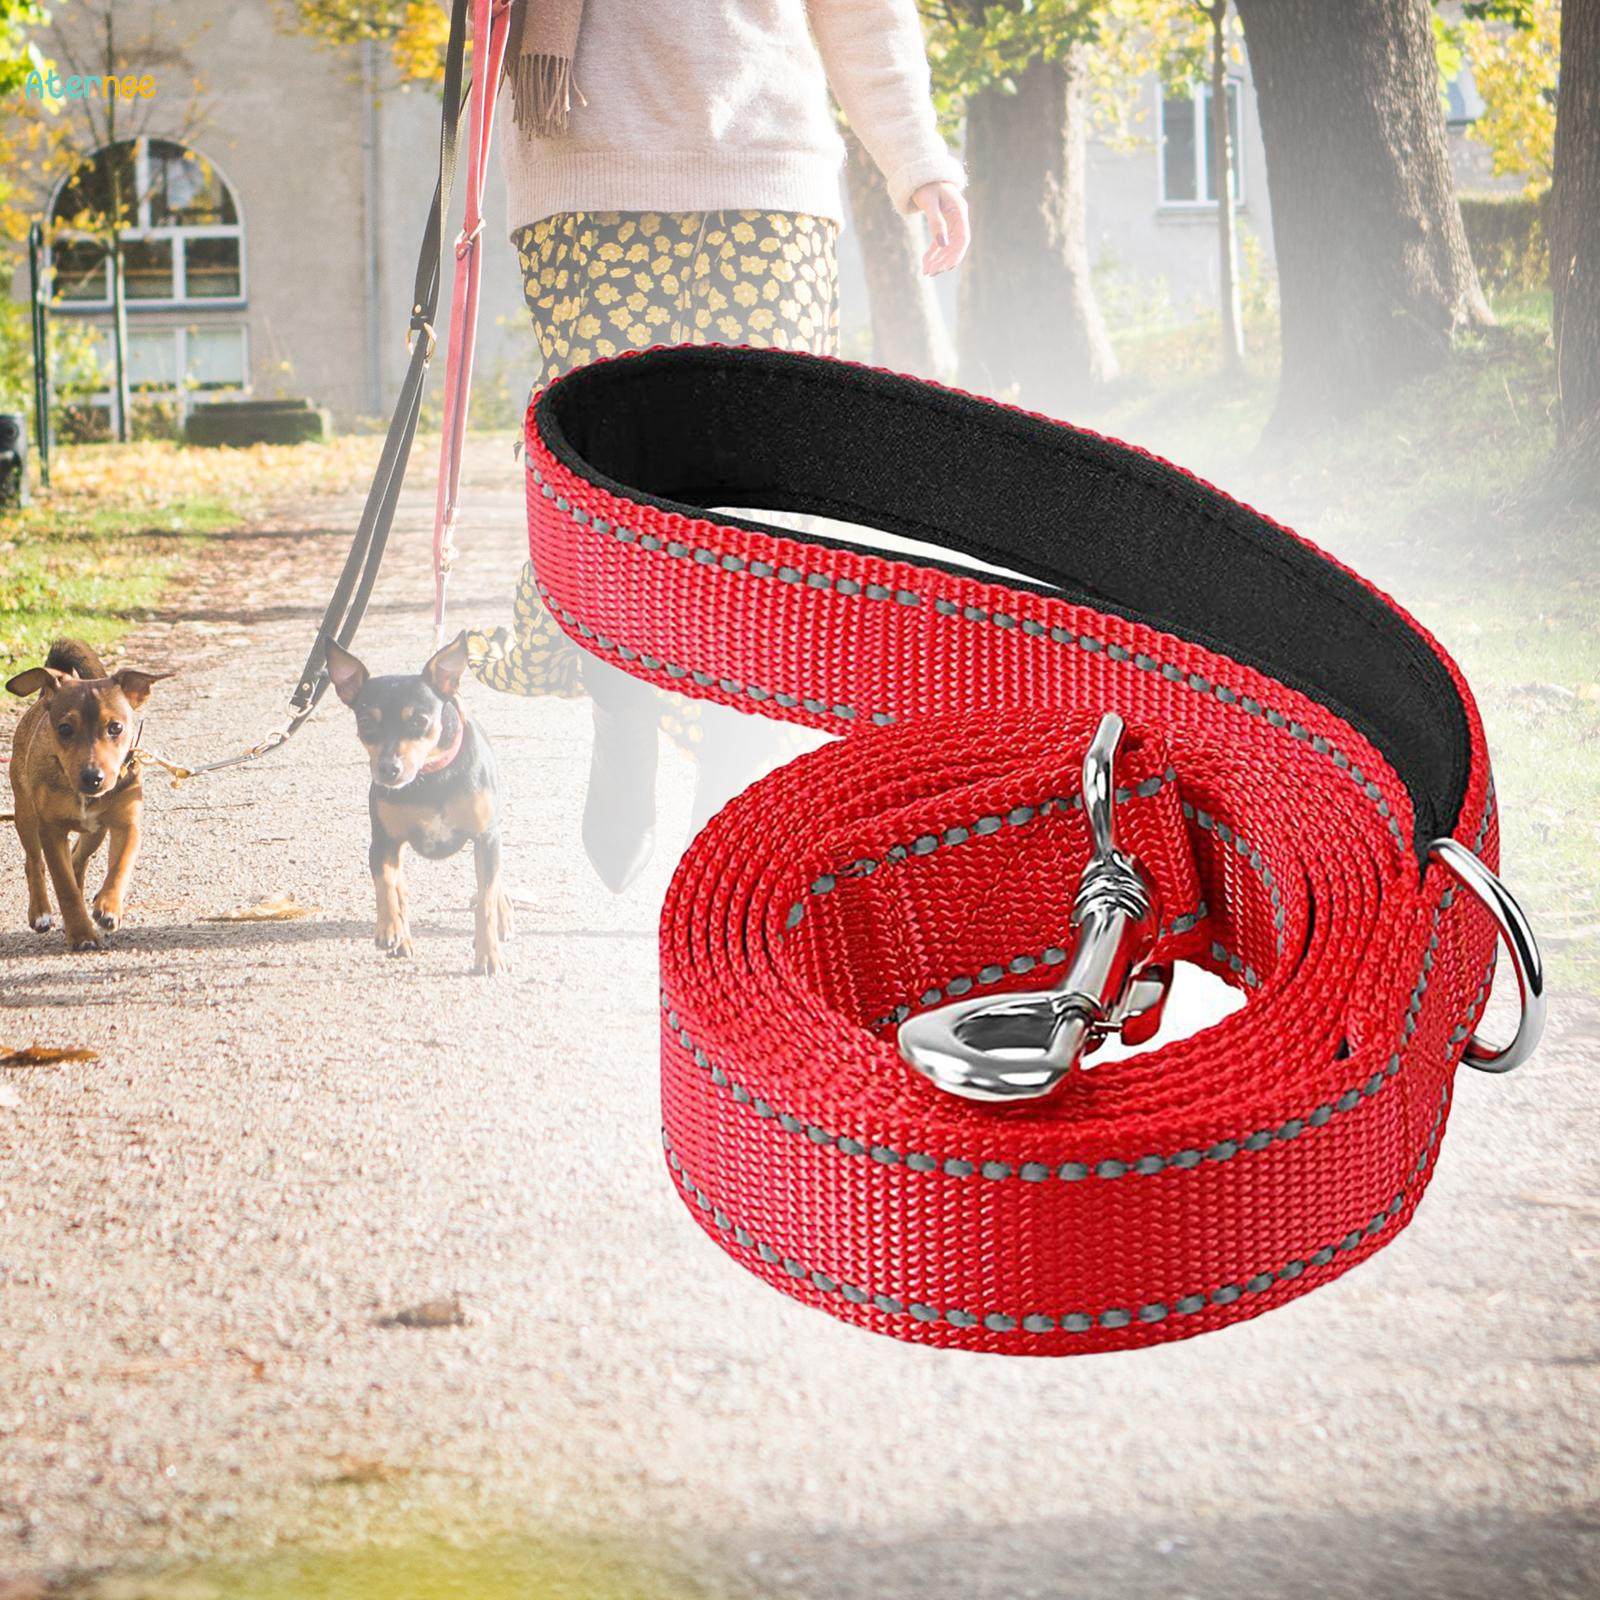 Reflective Dog Leash Strong with D Puppy Heavy Duty Durable